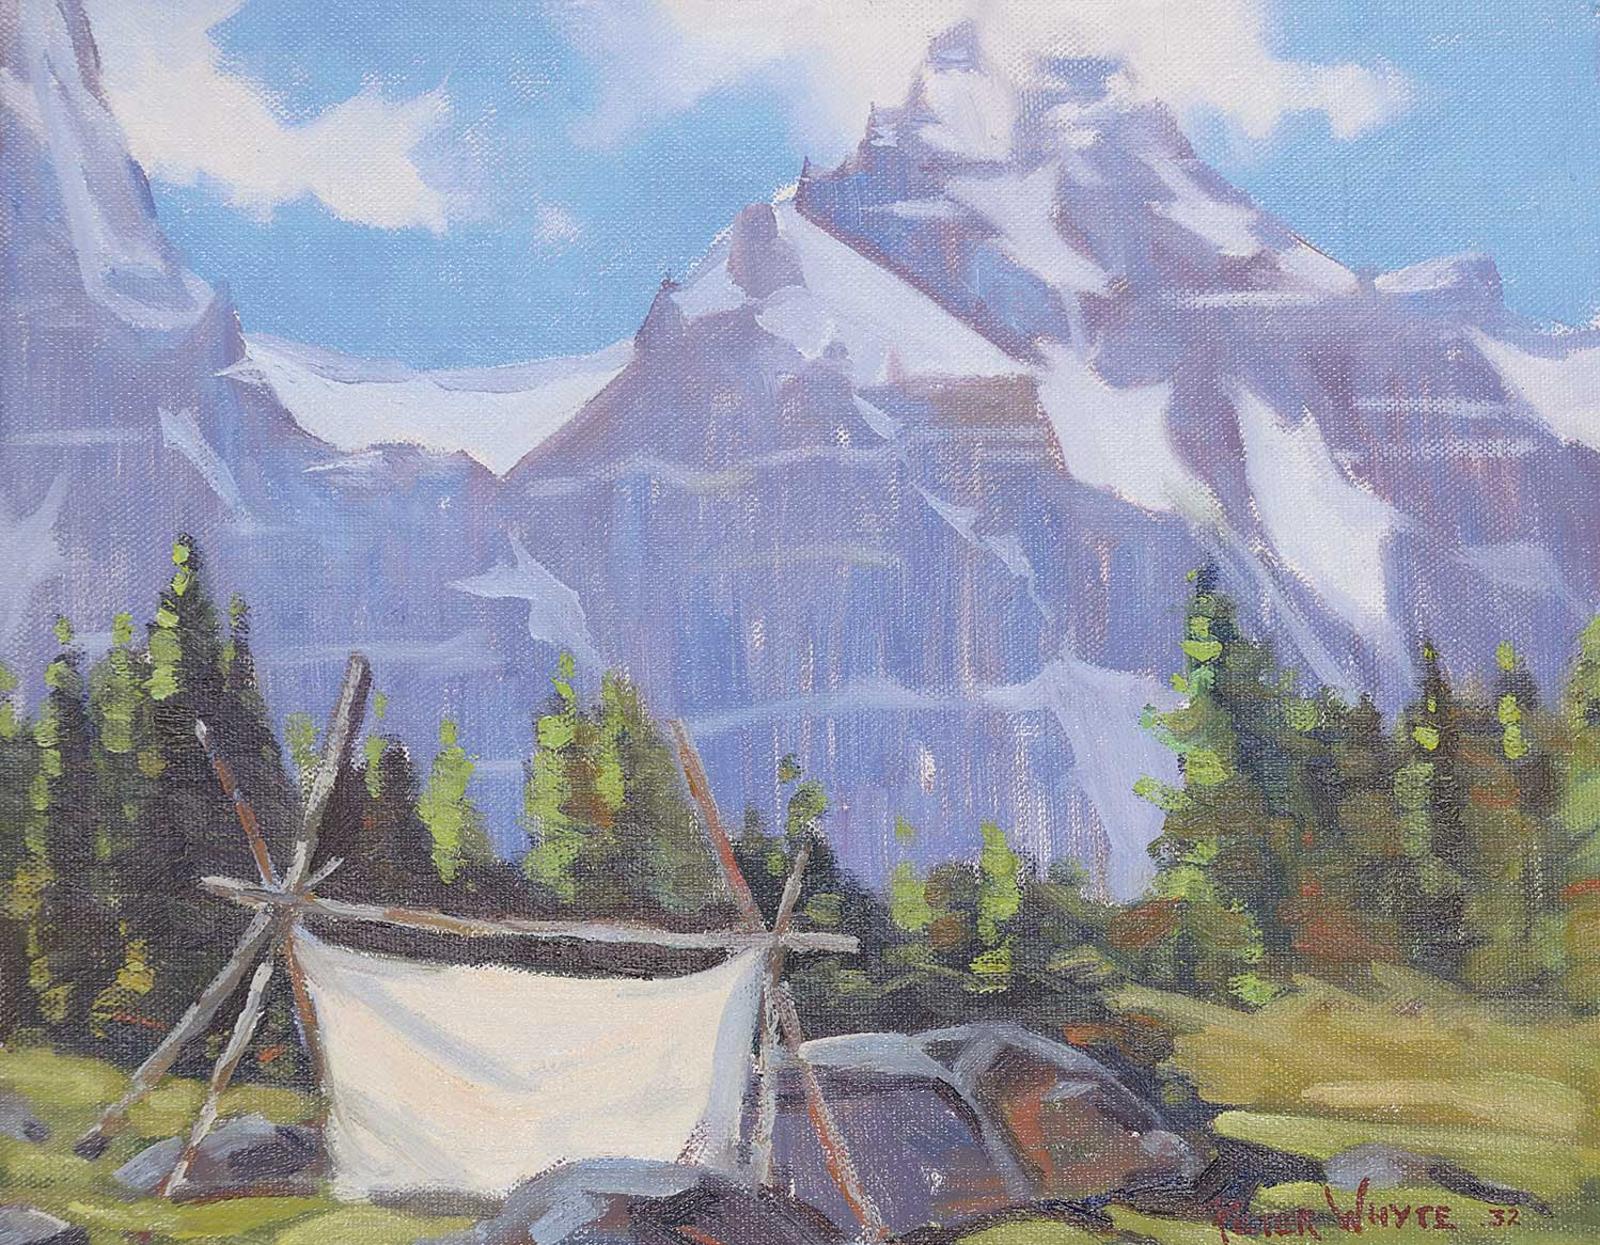 Peter Whyte (1905-1966) - Untitled - Sketching Tent in the Rockies